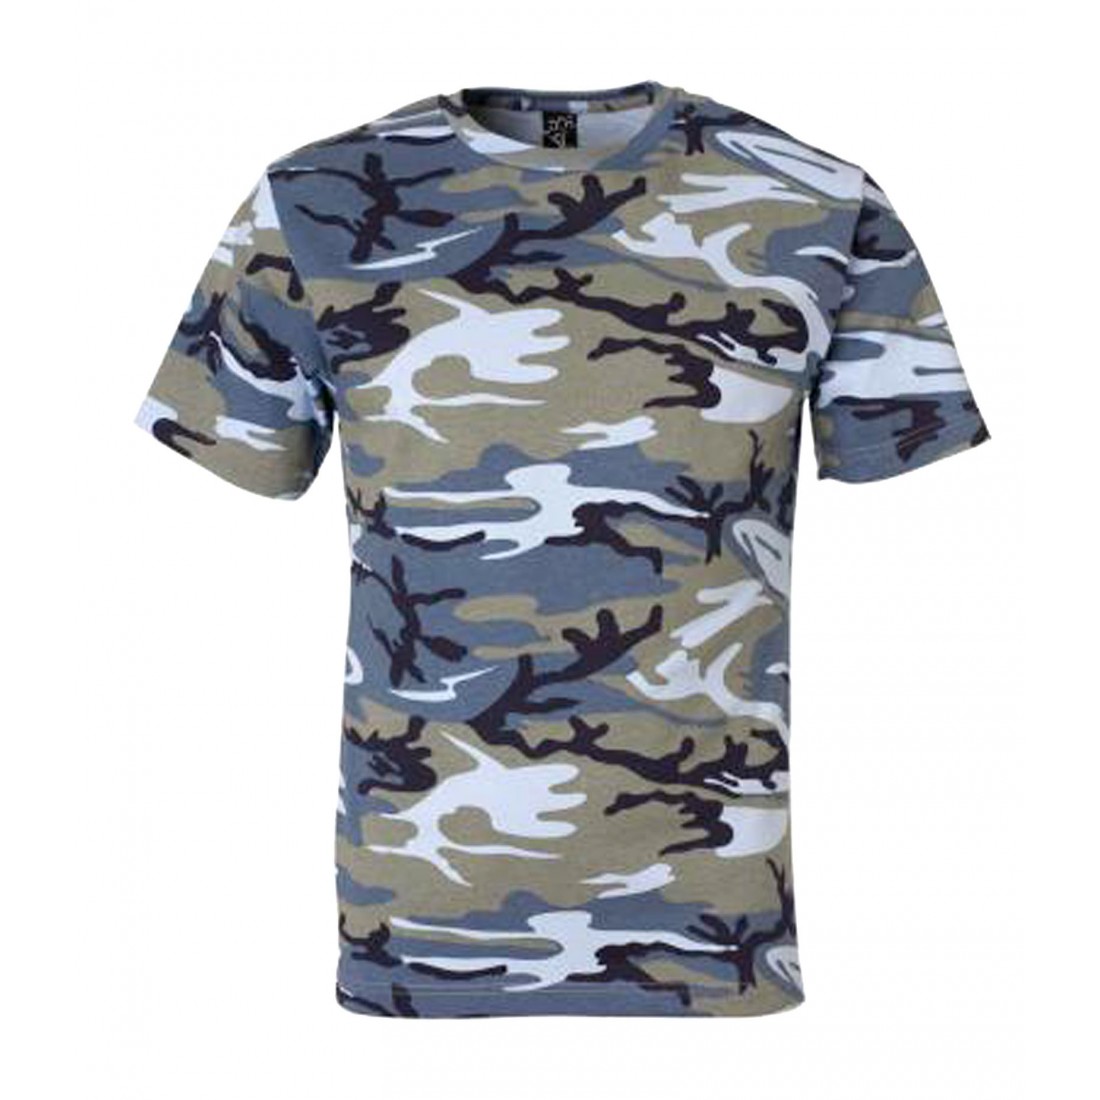 Forest Camo Tshirt cs go skin download the last version for iphone